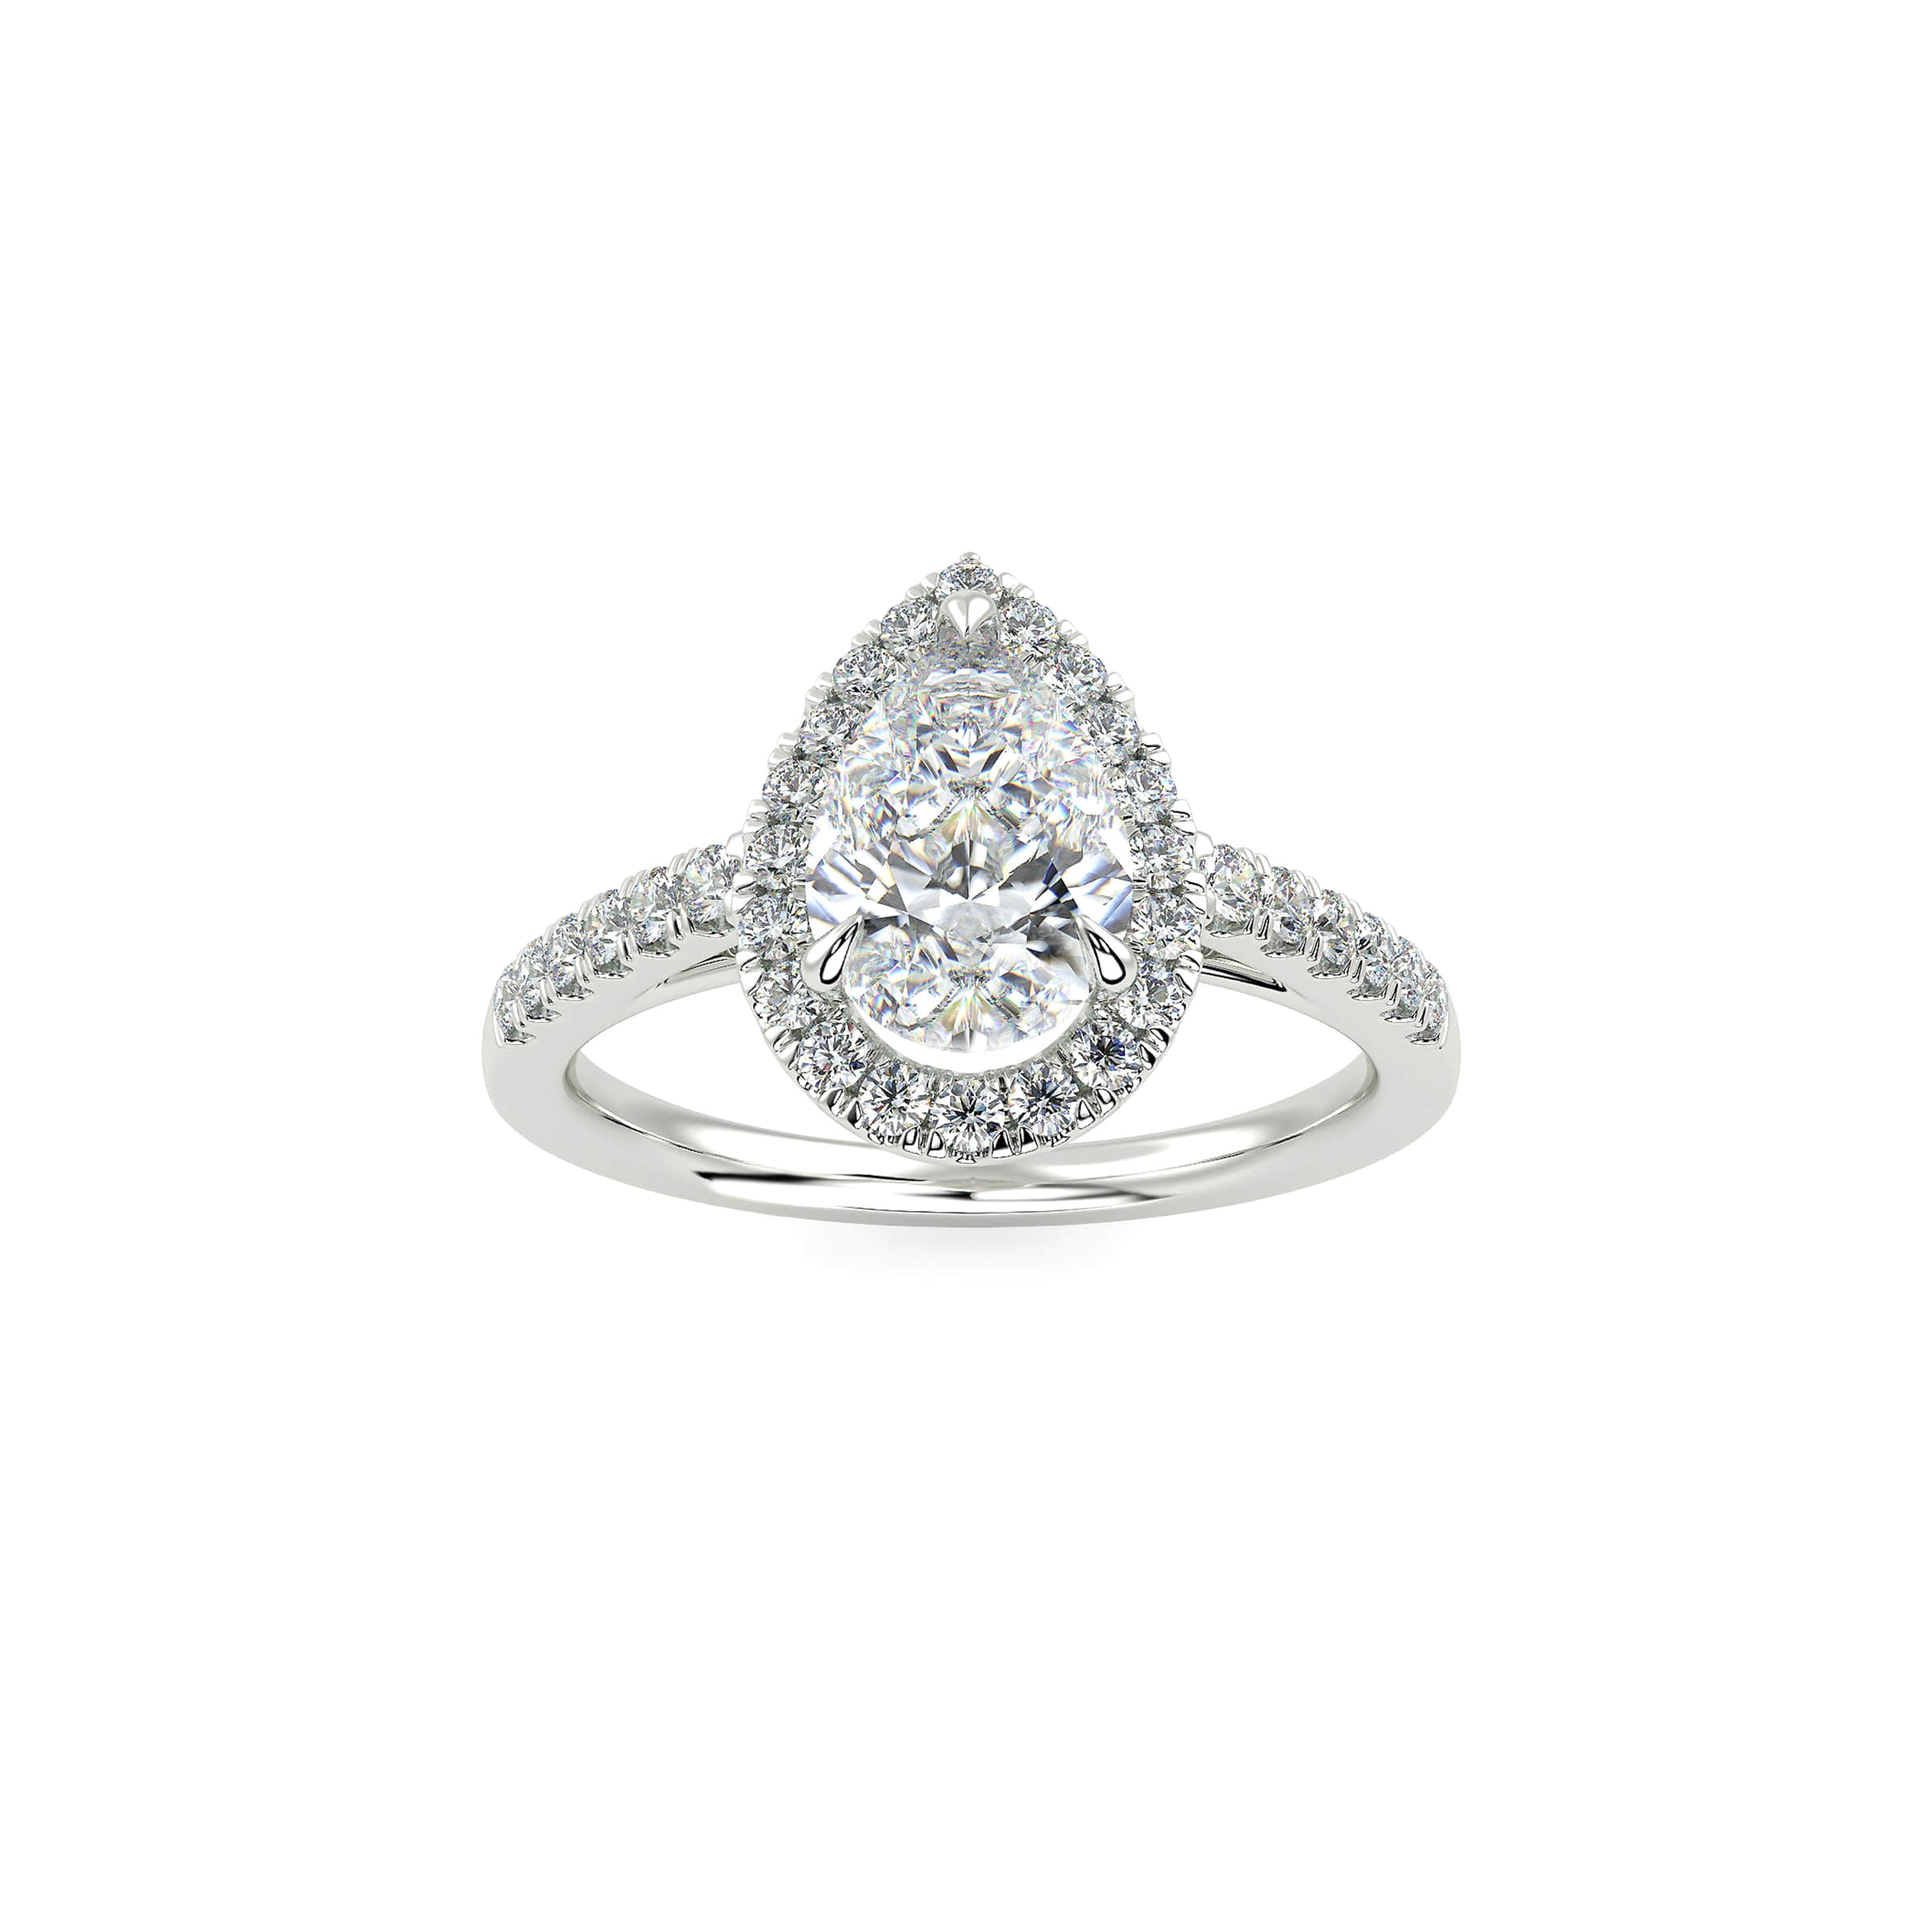 darry ring pear shaped engagement ring